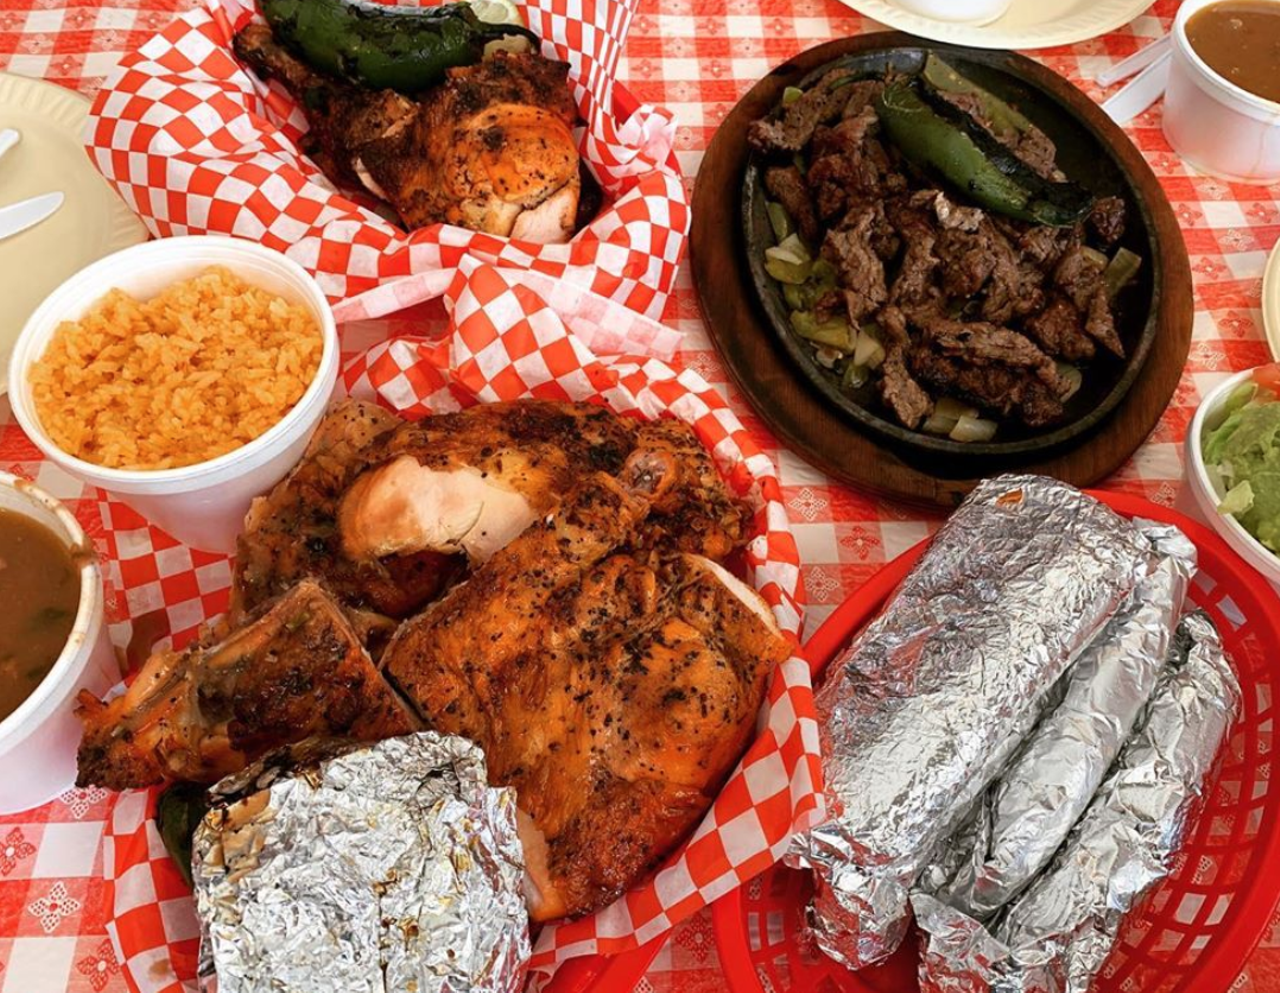 Pollos Asados Los Norteños
4642 Rigsby Ave, (210) 648-3303, bestpollosasados.com
Ever wondered why this East Side spot is so damn tasty? It’s because the flavors are completely legit here. Juicy chicken and all the fixings await you, and it’ll satisfy your pansita every single time.
Photo via Instagram / feedingfusco